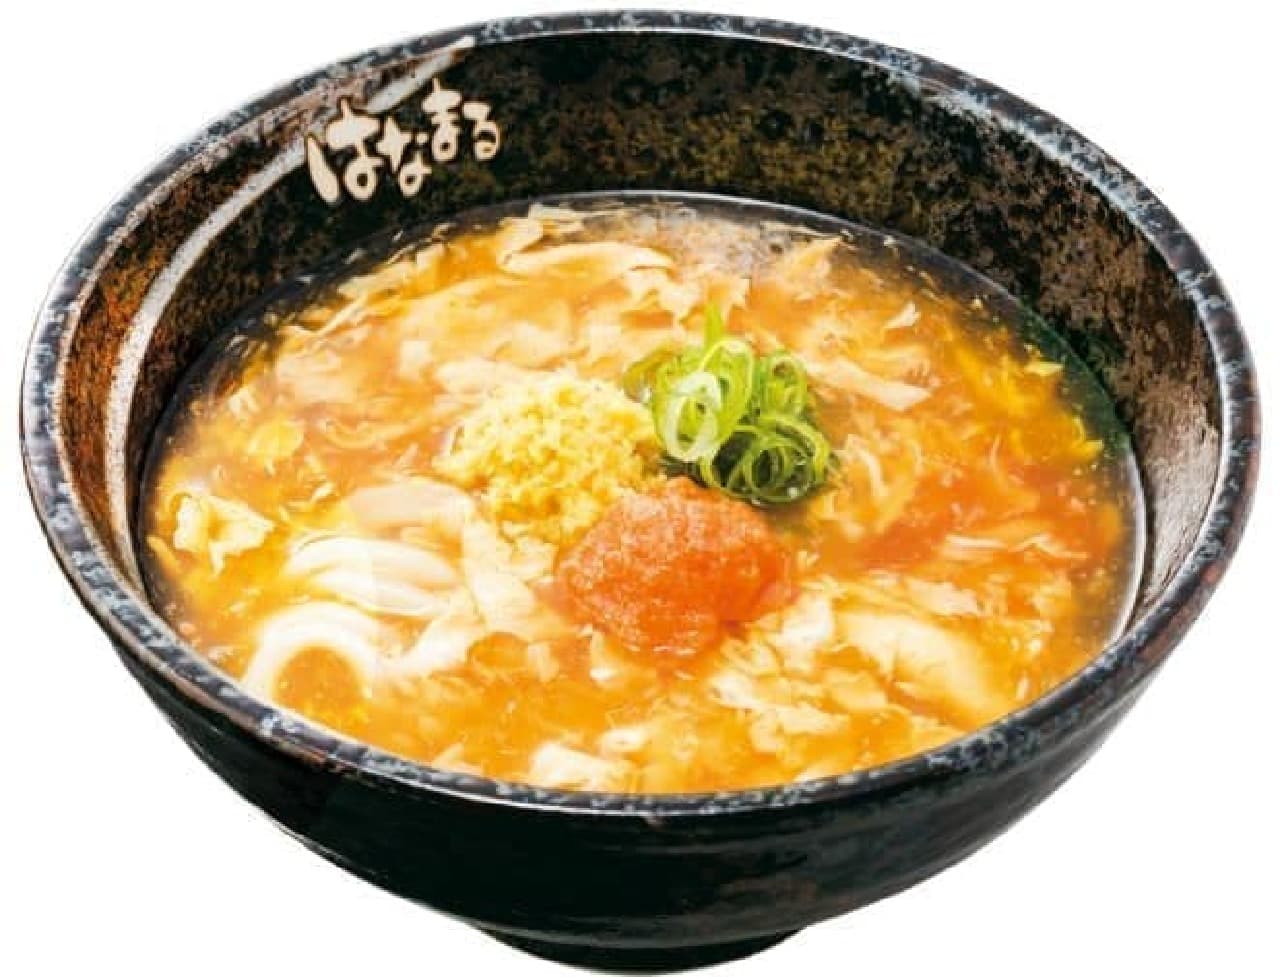 Menta ginger egg ankake is a udon noodle topped with grated ginger and mentaiko on an egg-filled ankake.